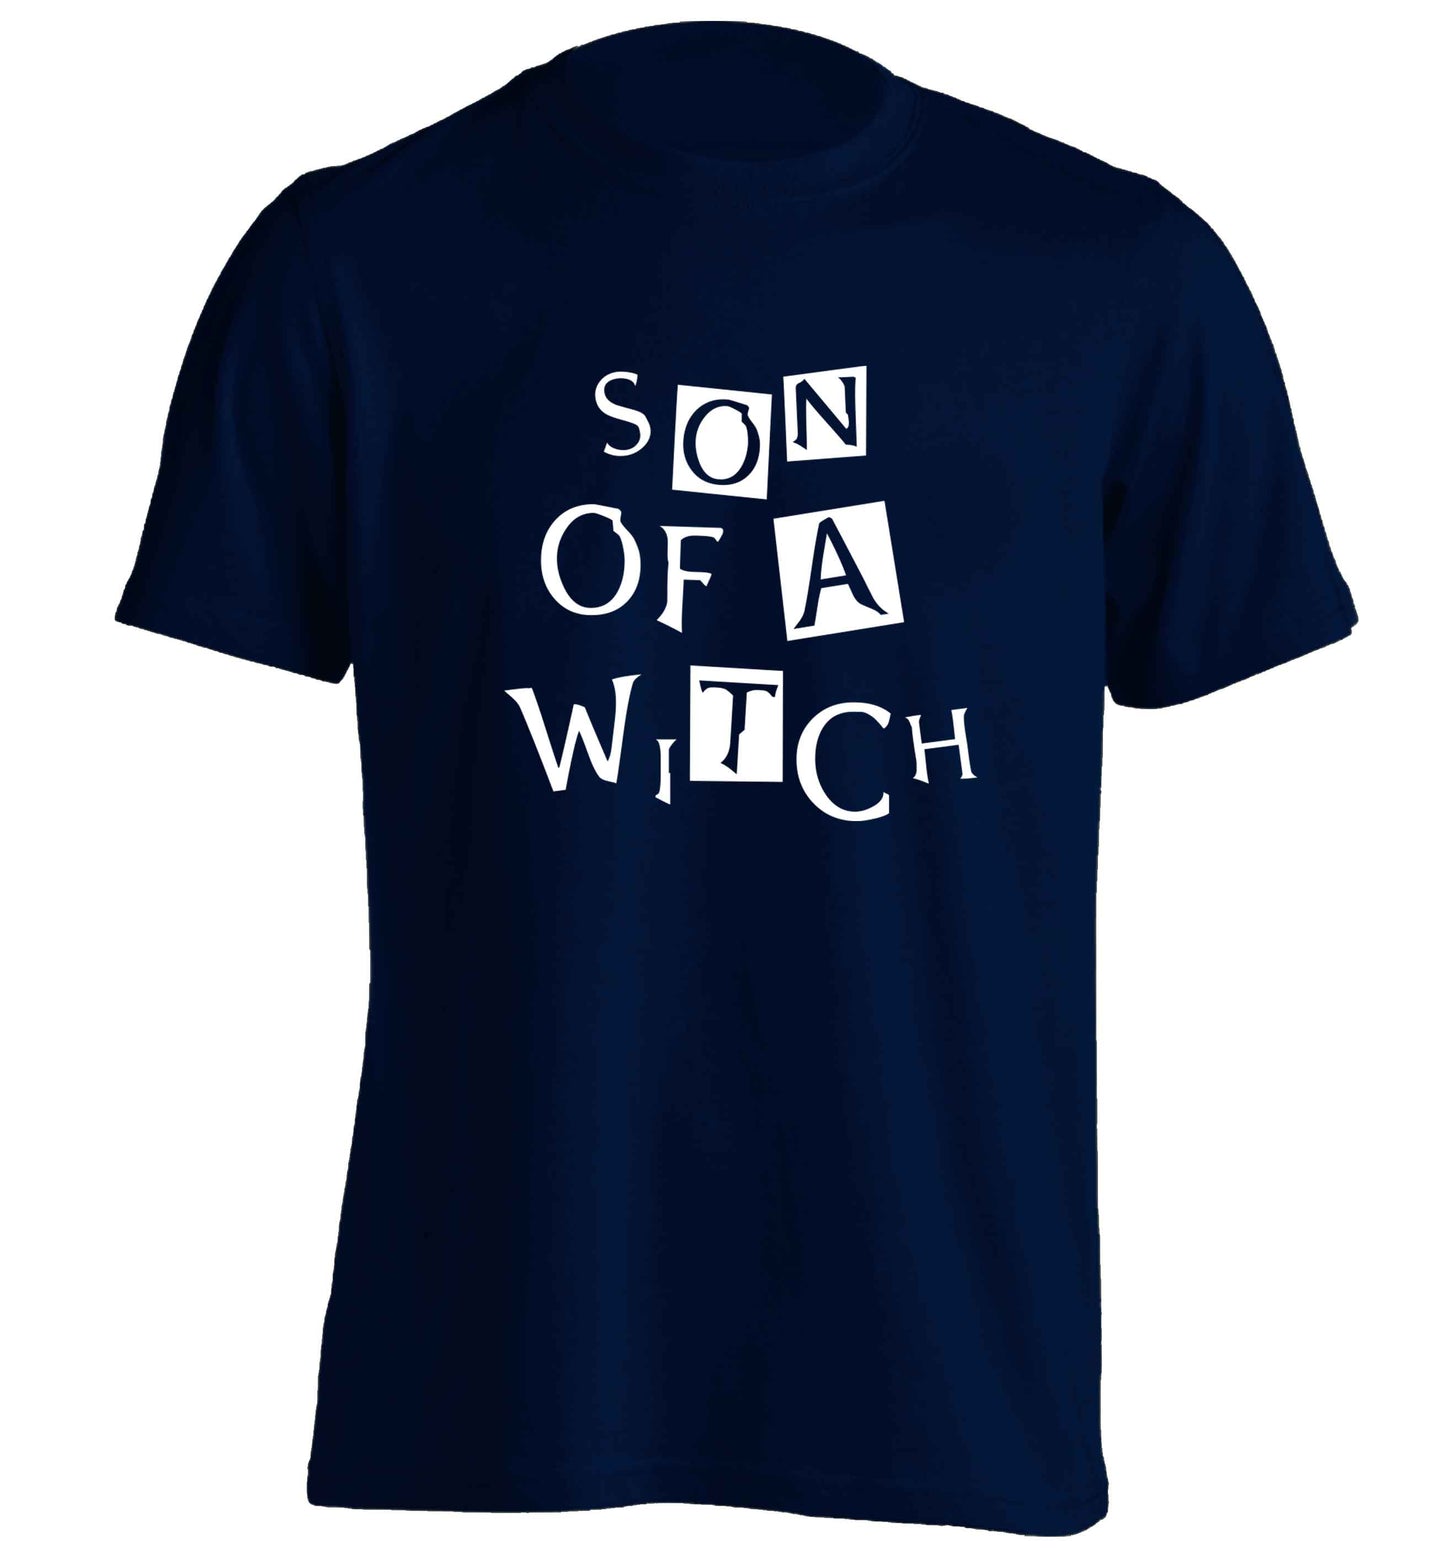 Son of a witch adults unisex navy Tshirt 2XL